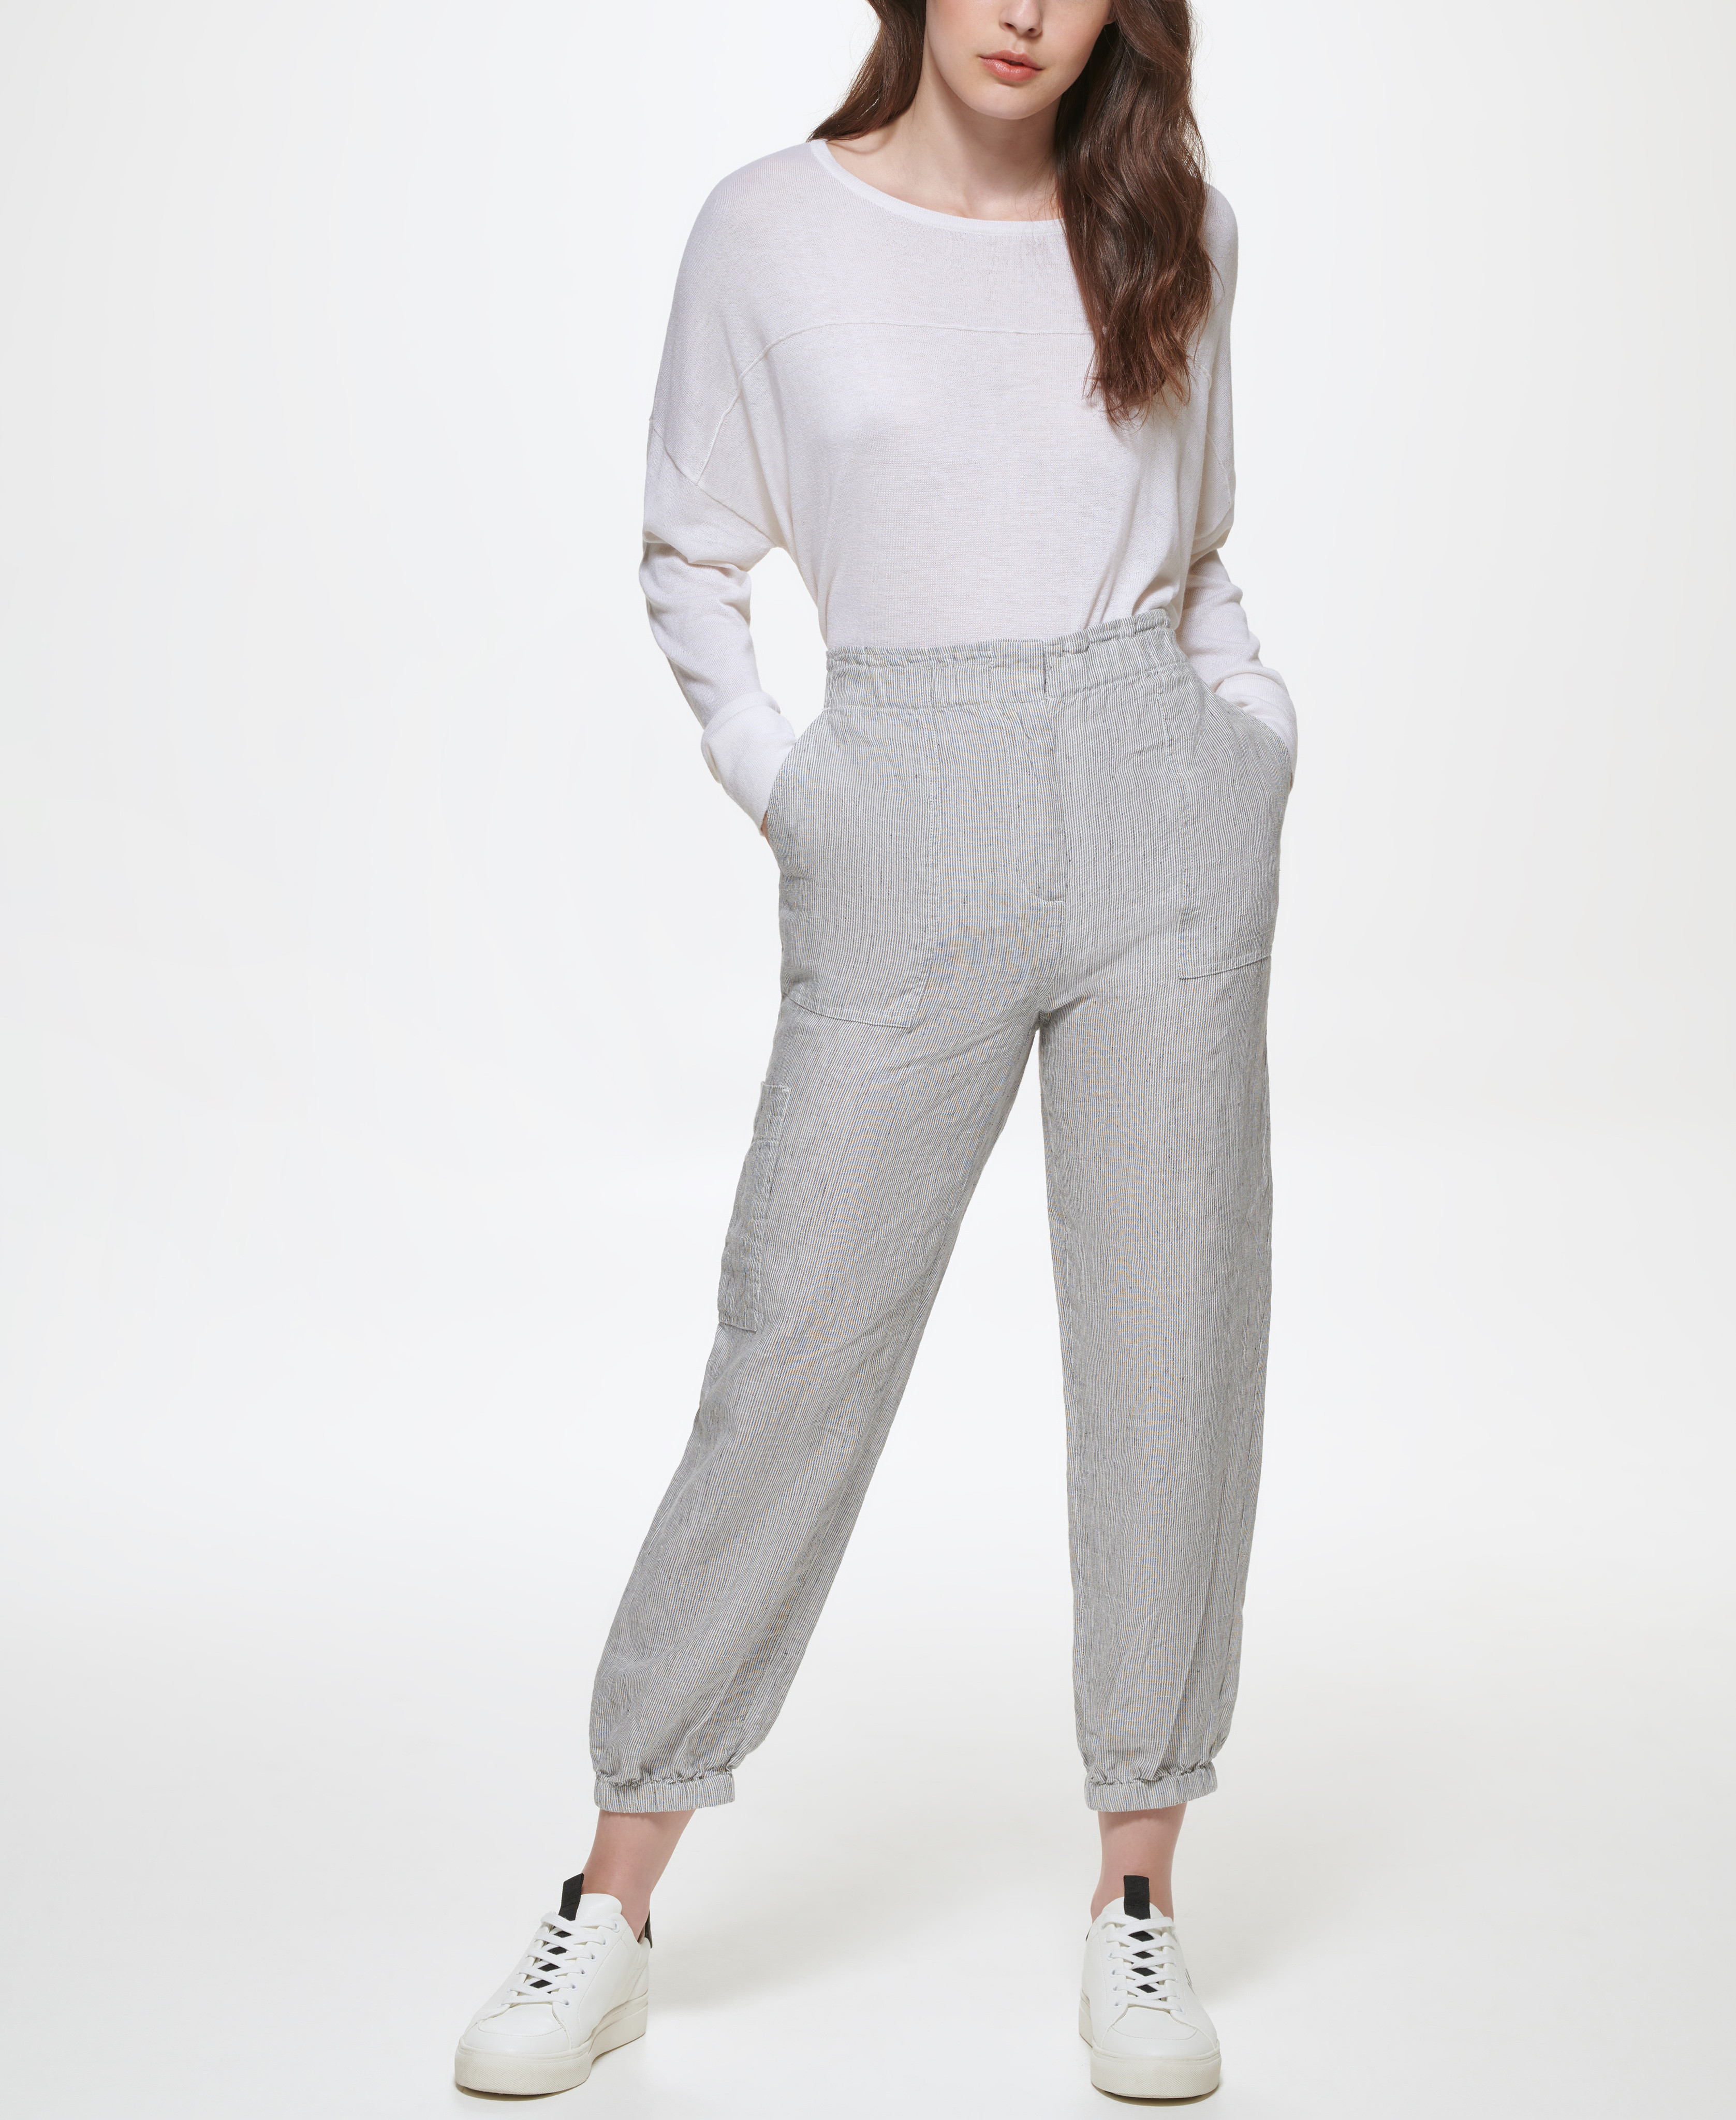 Pantalone jogger a righe, Grigio, large image number 3